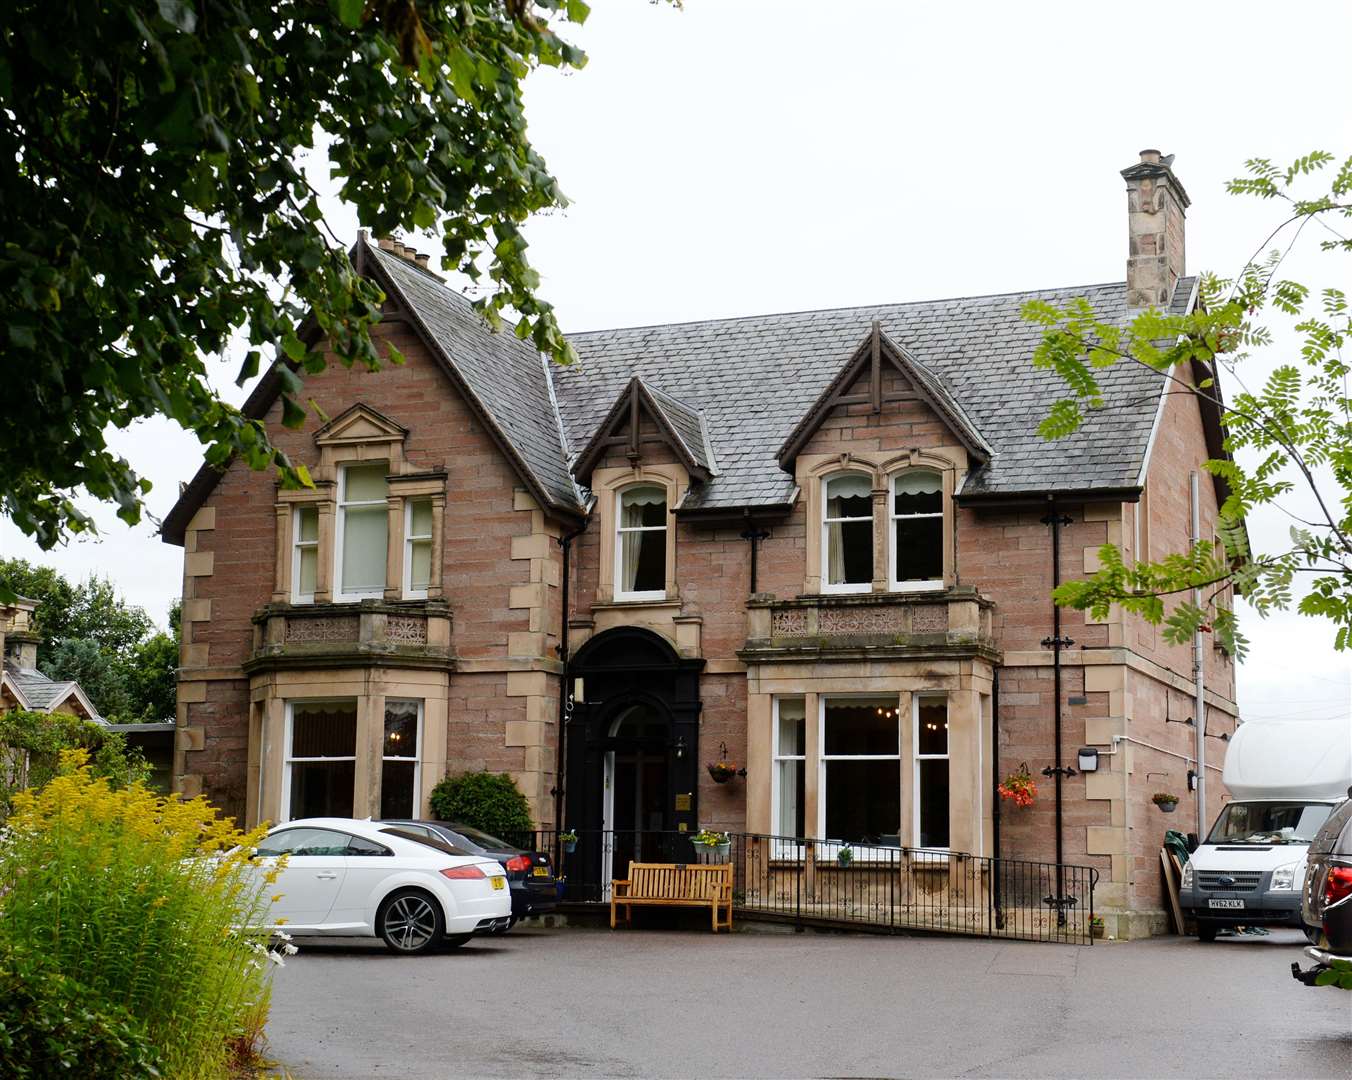 Southside Care Home was ordered to make improvements.